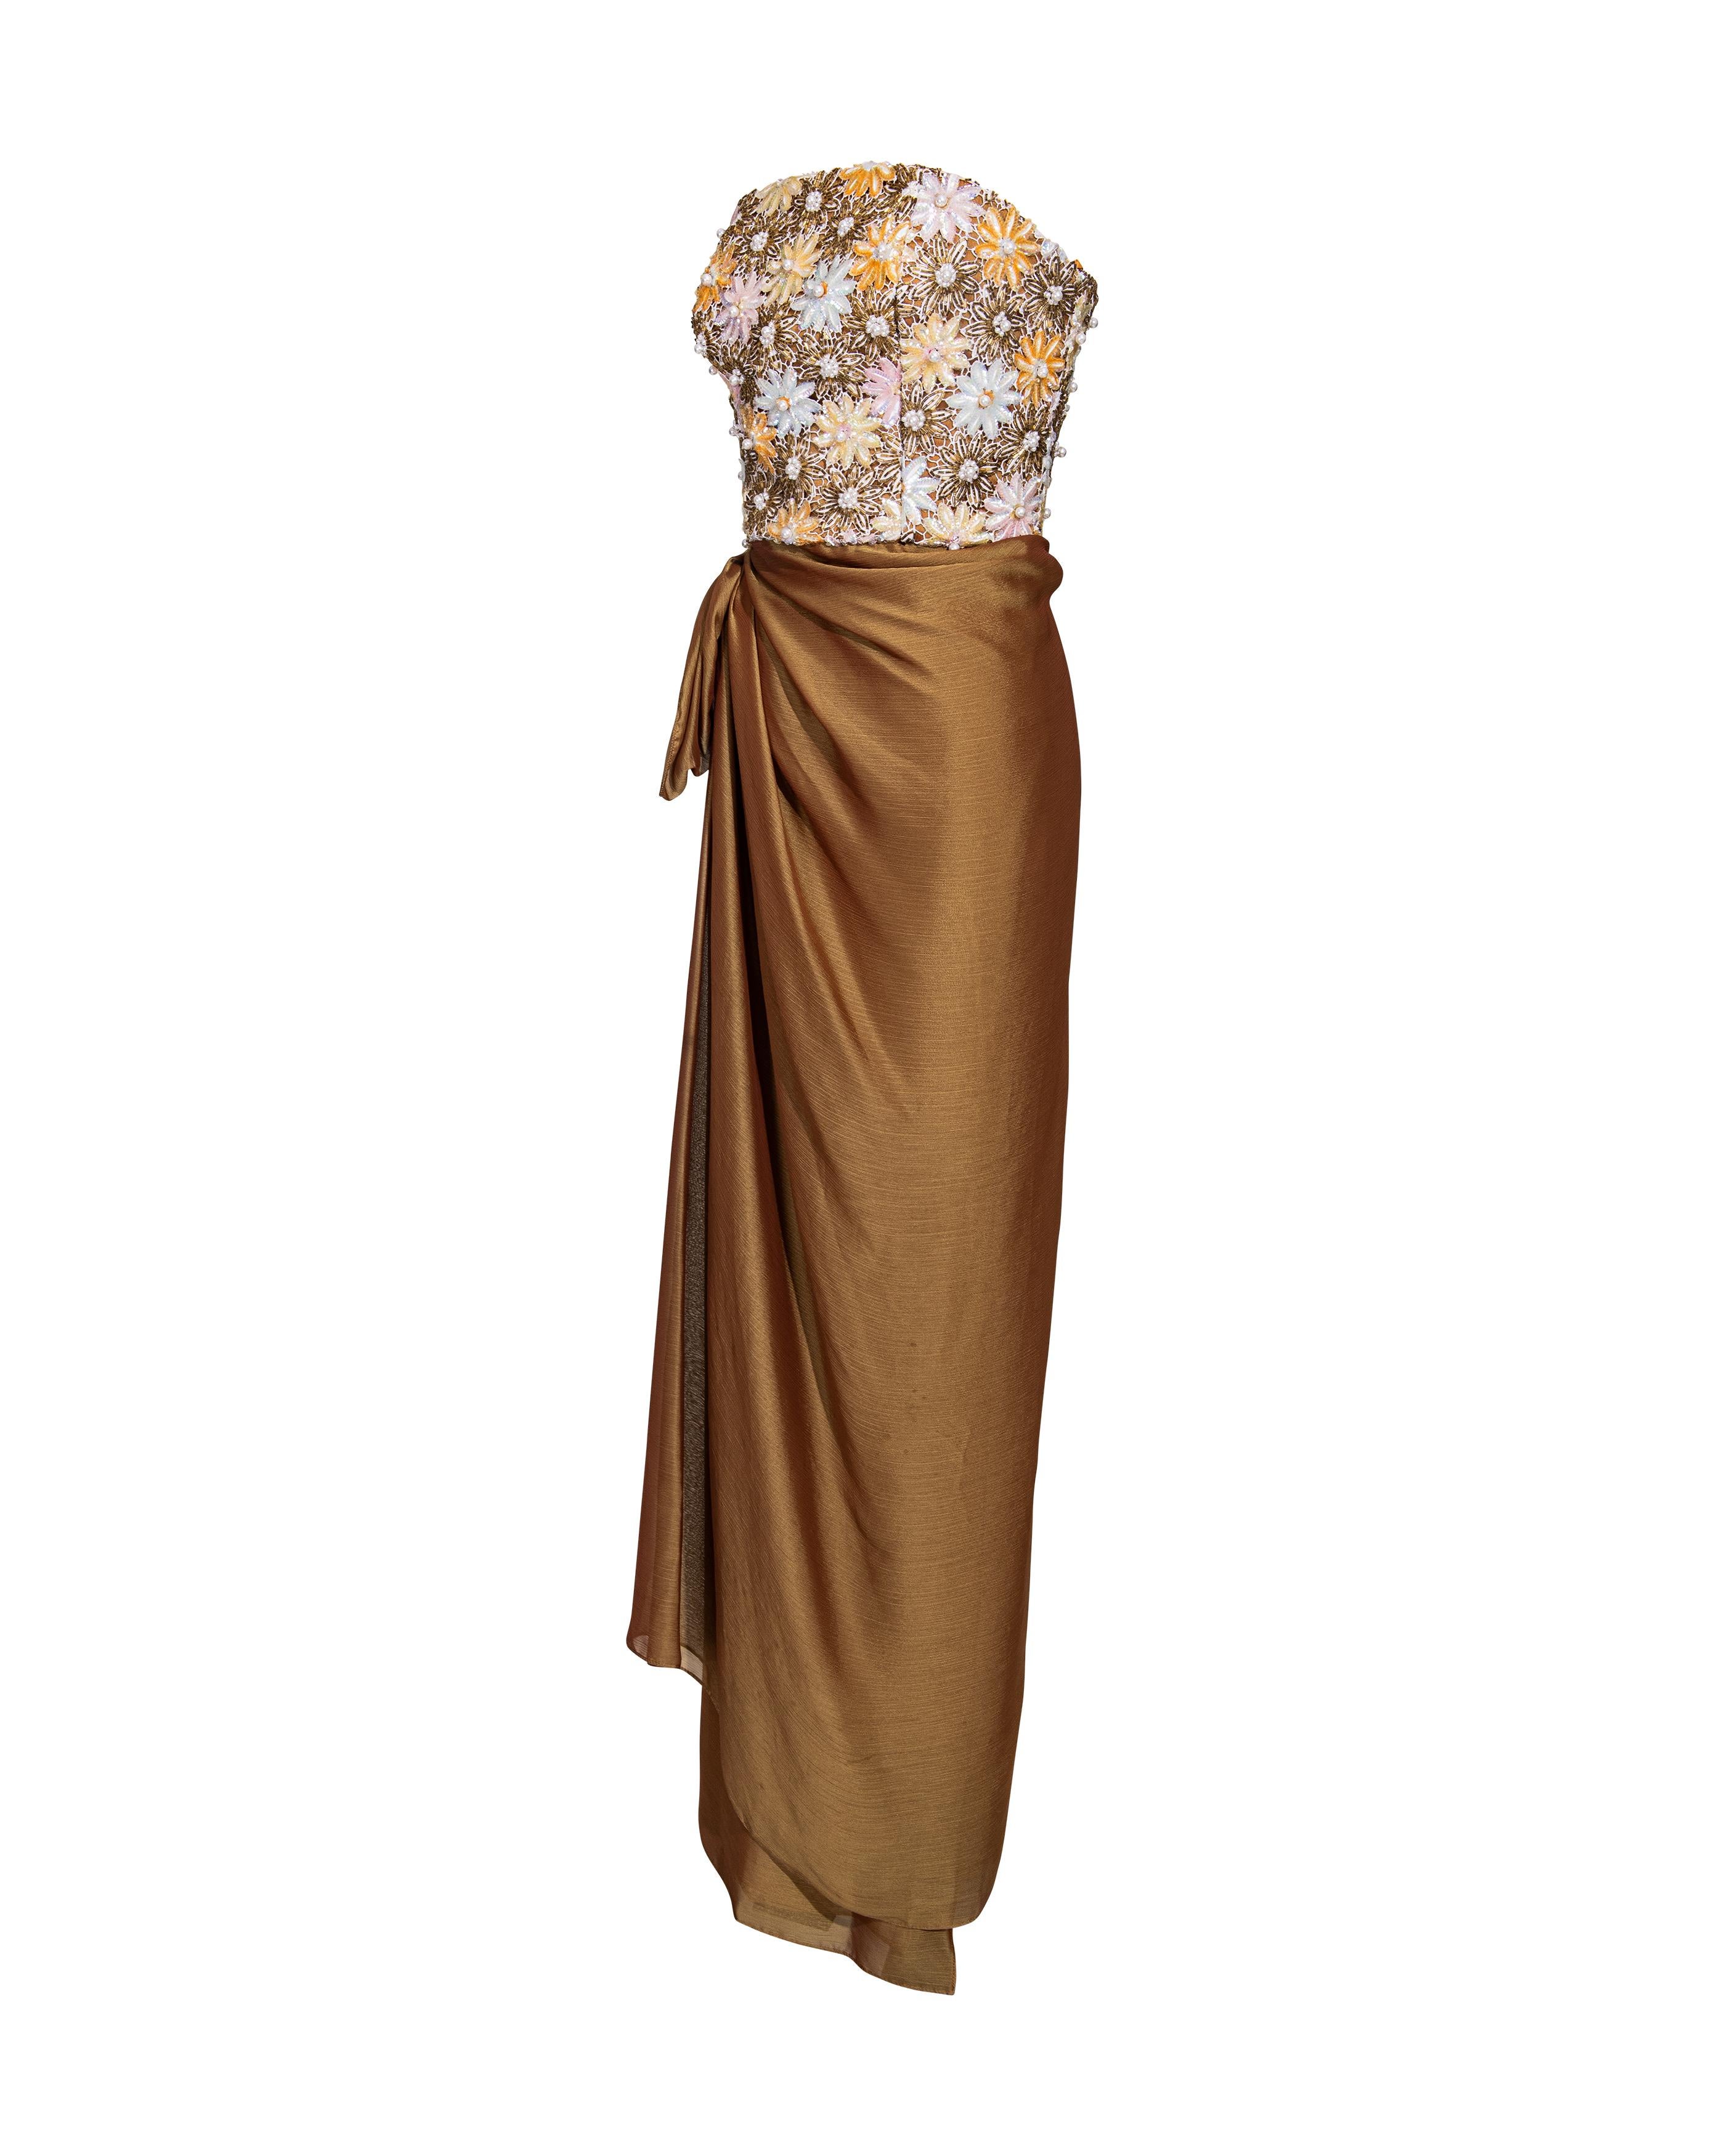 Women's c. 1991 Nina Ricci Embellished Copper Strapless Gown with Stole For Sale